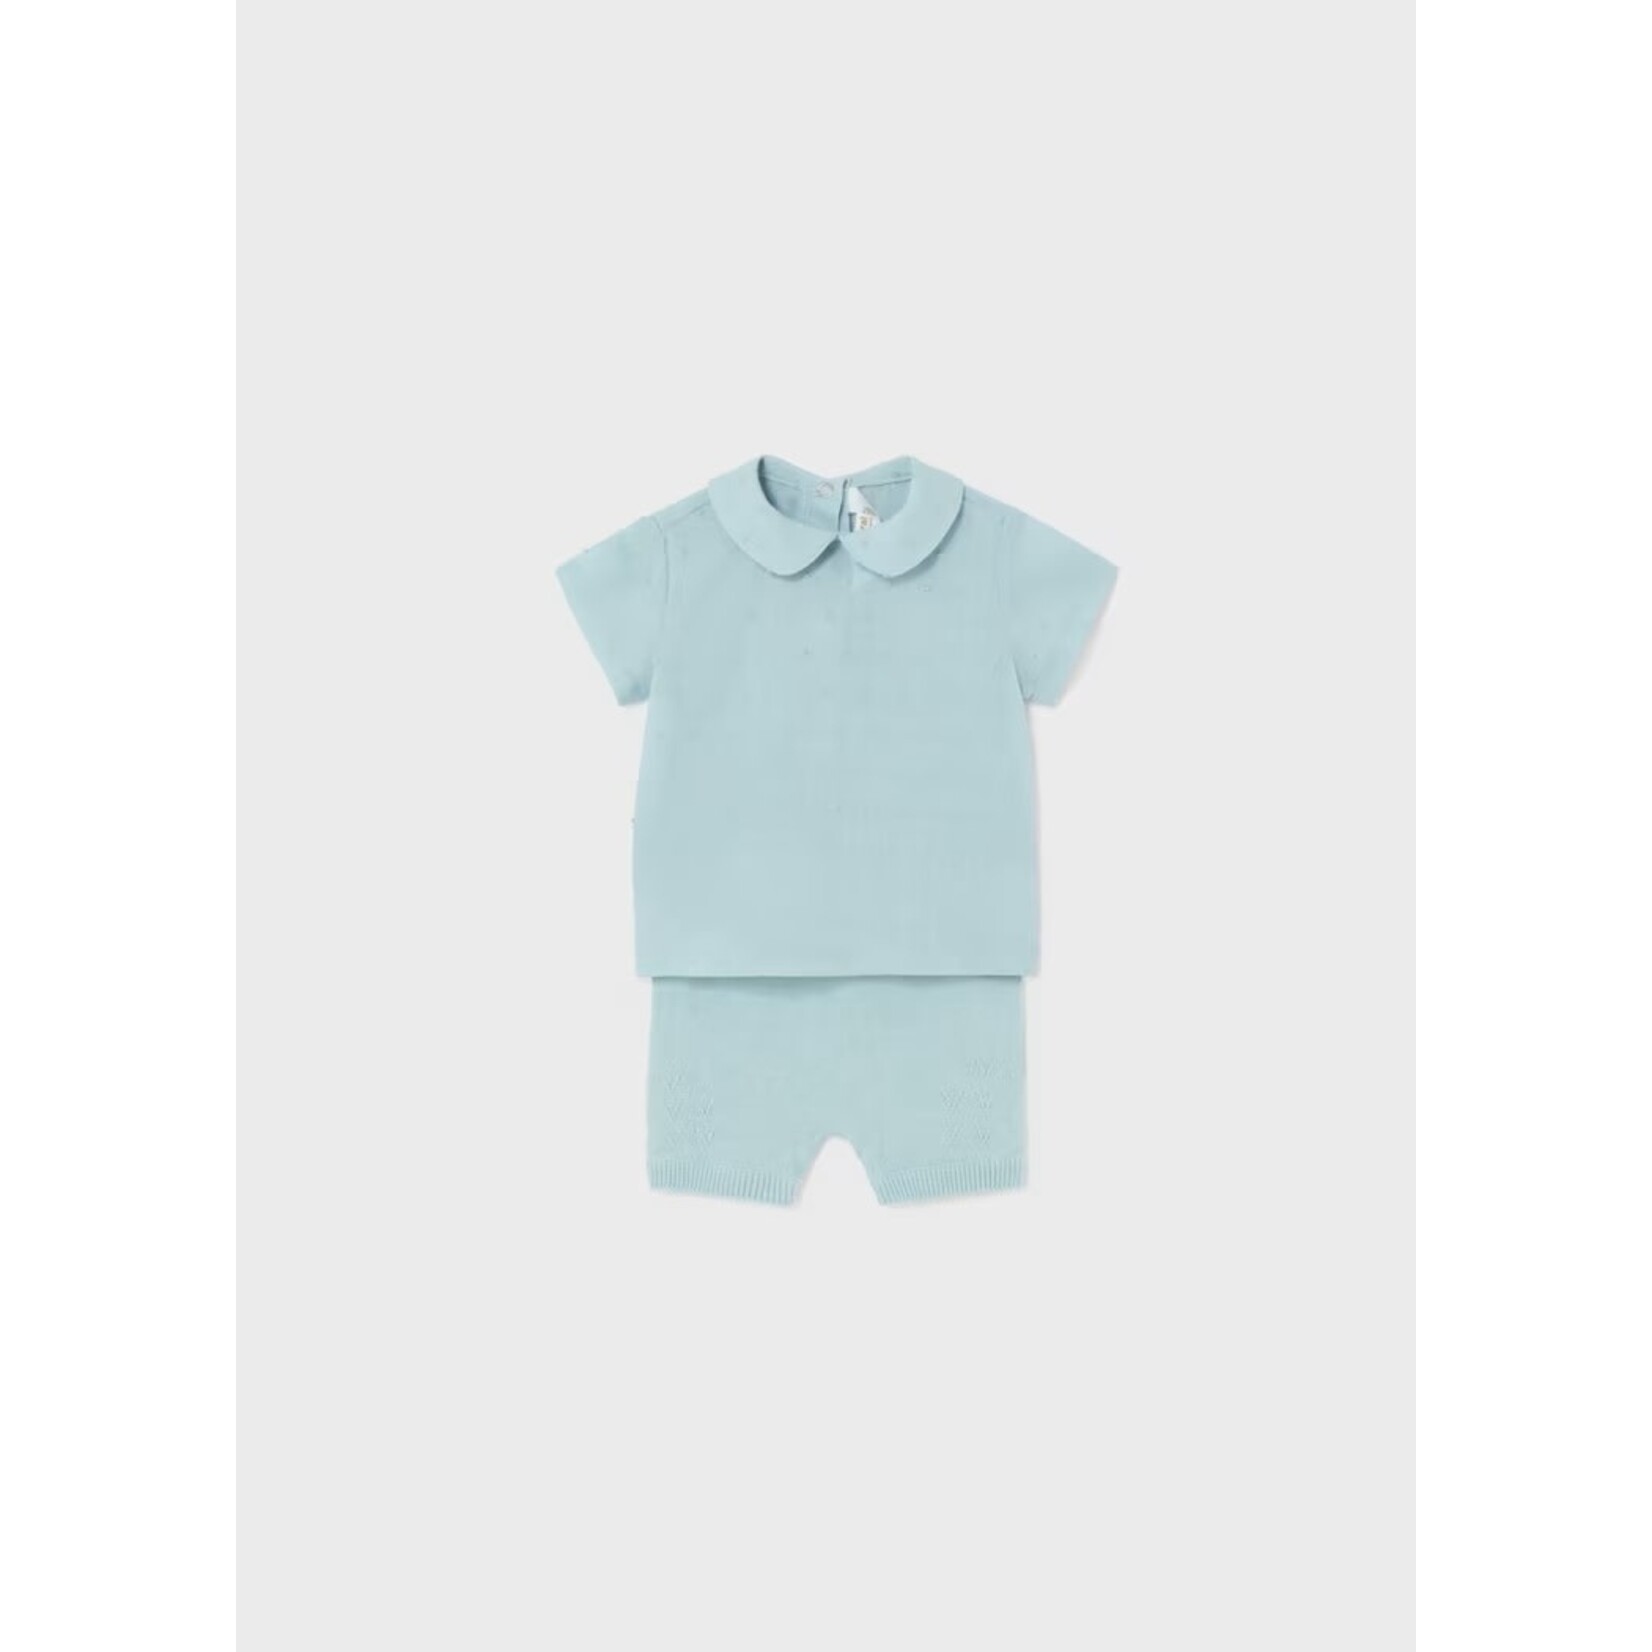 Mayoral MAYORAL - Two-Piece Set - Light Blue Short Sleeve Blouse and Fine Knit Shorts